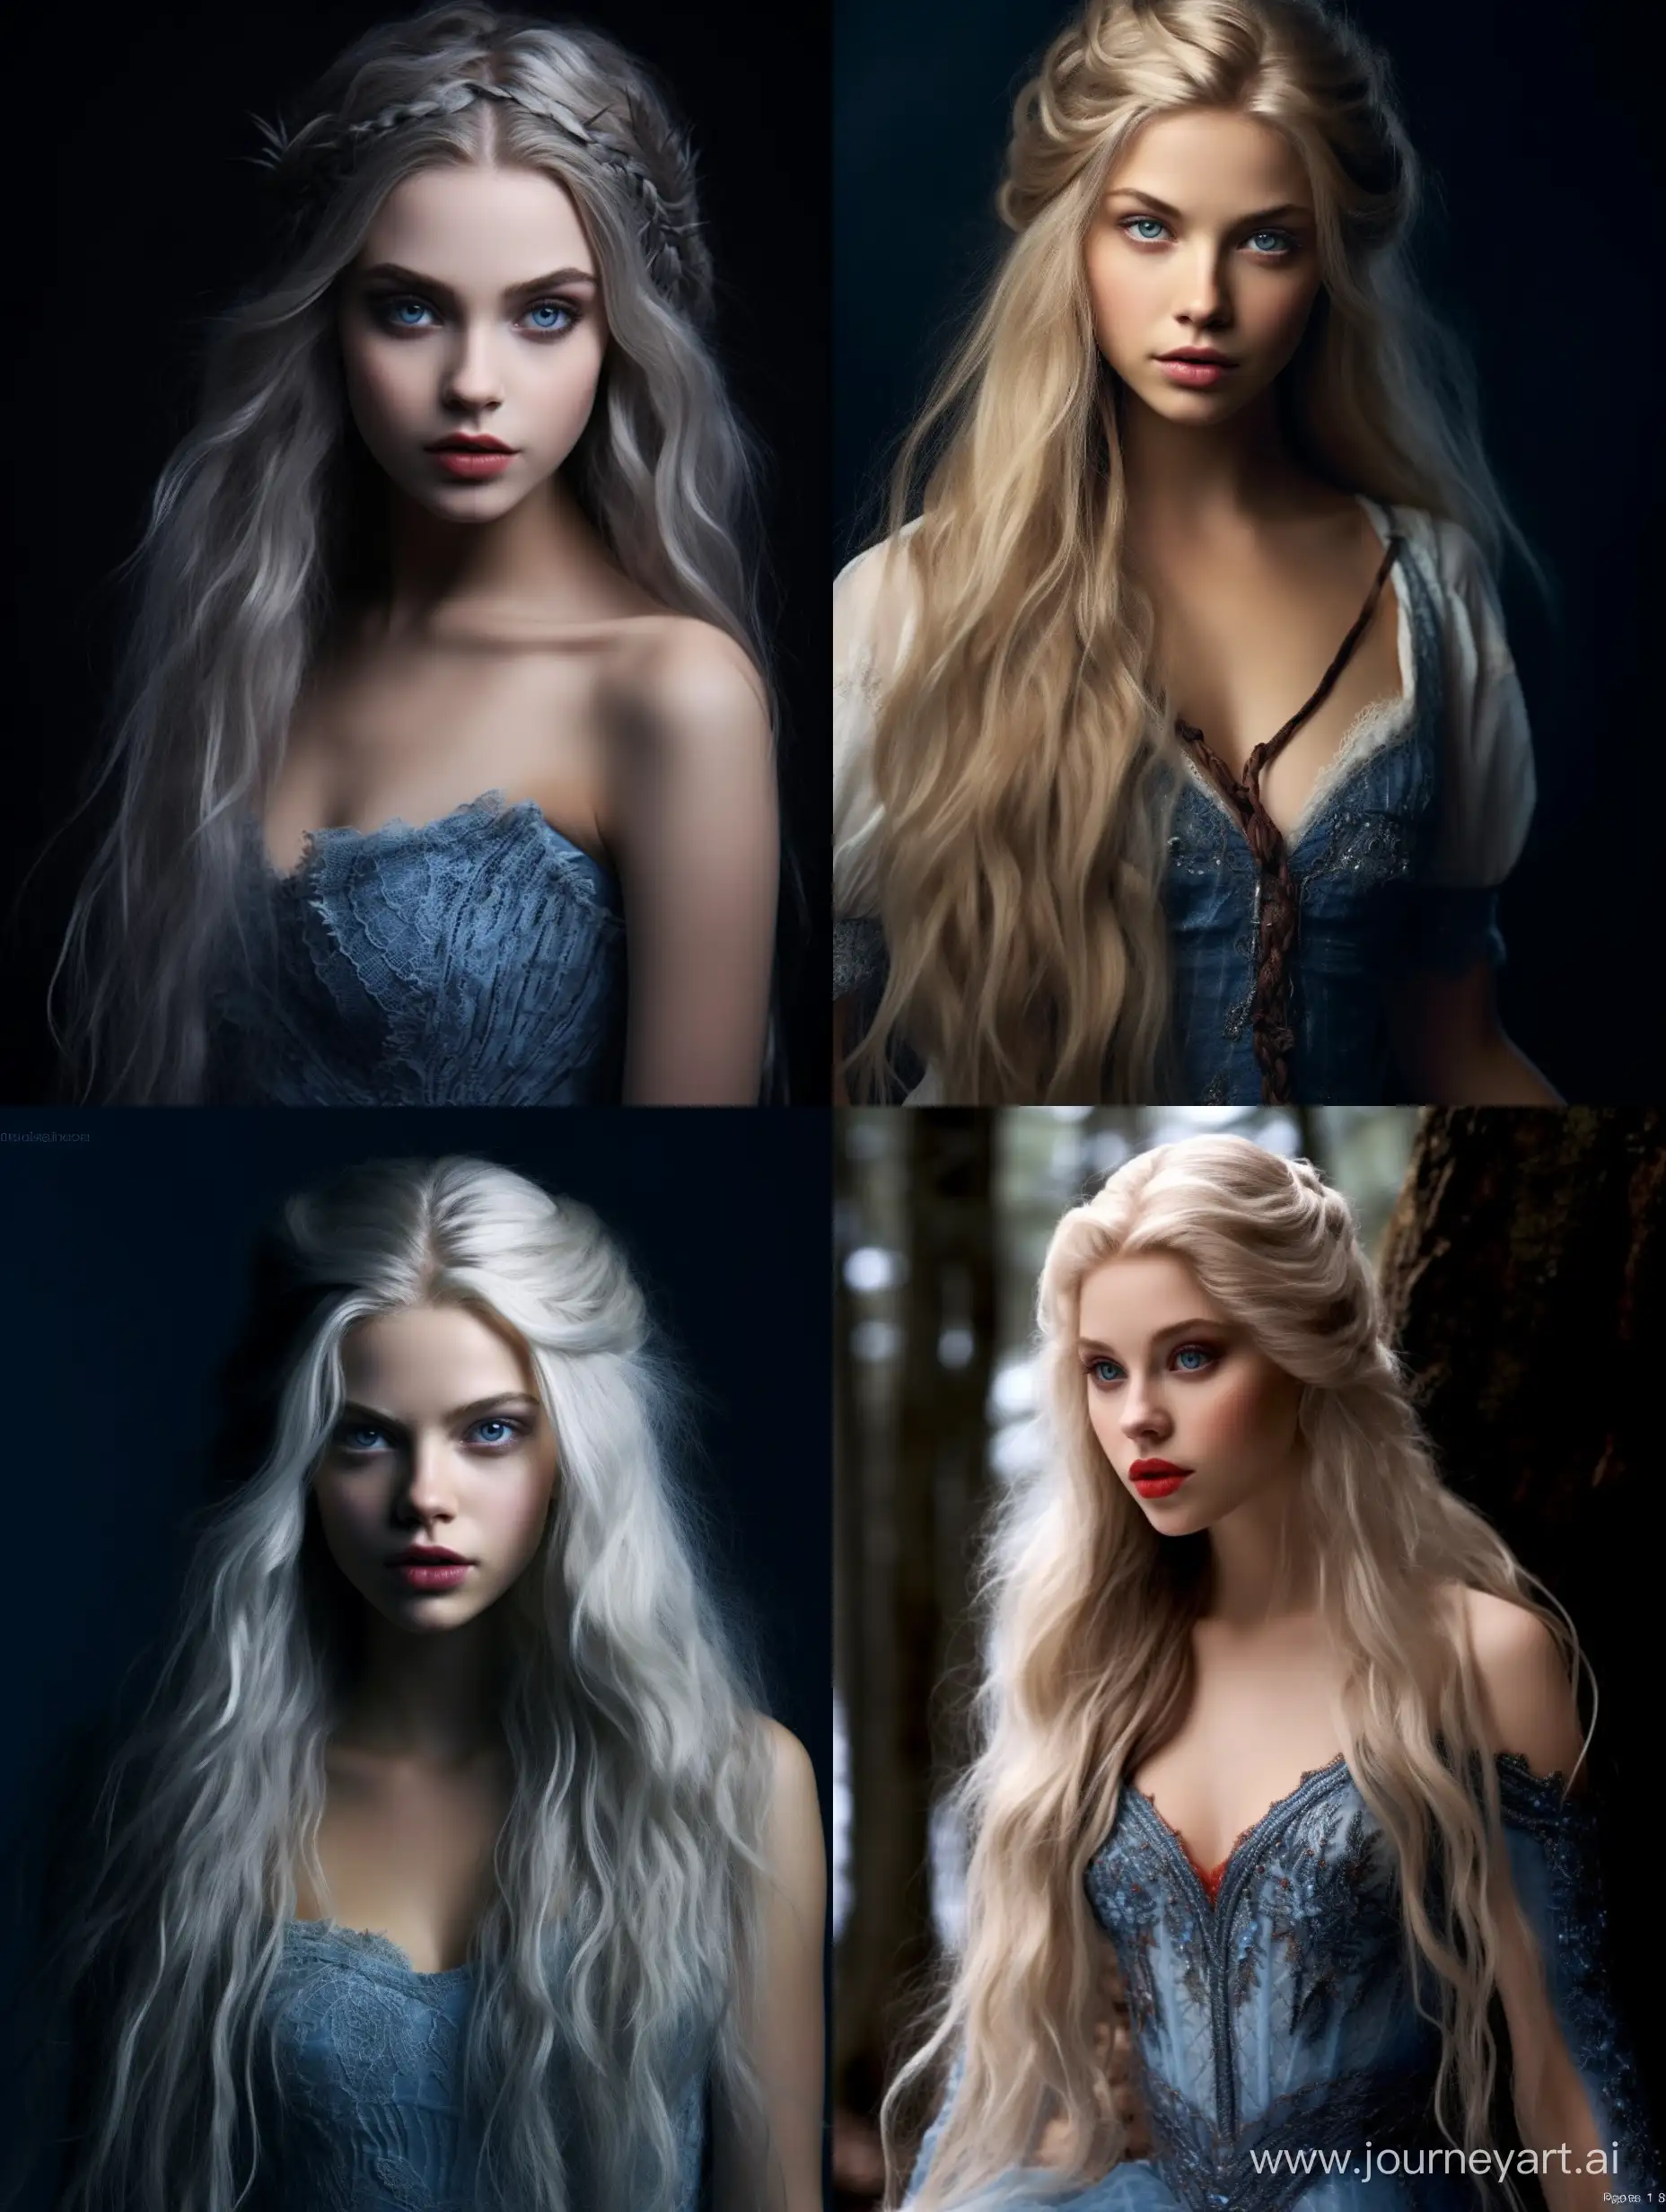 Francesca Findabair: Most beautiful woman in the world, her blue, elven eyes ringed with dark kohl make-up. She had long golden hair worn in majestic hairstyles and wore a lavish crimson dress and a red Ruby necklace. Sharp Elven features, and long pointed ears. Loosely base features on Samara Weaving, Margot Robbie and Anya Taylor-Joy. Do not use any other color in outfit and jewellery other than red and gold. 